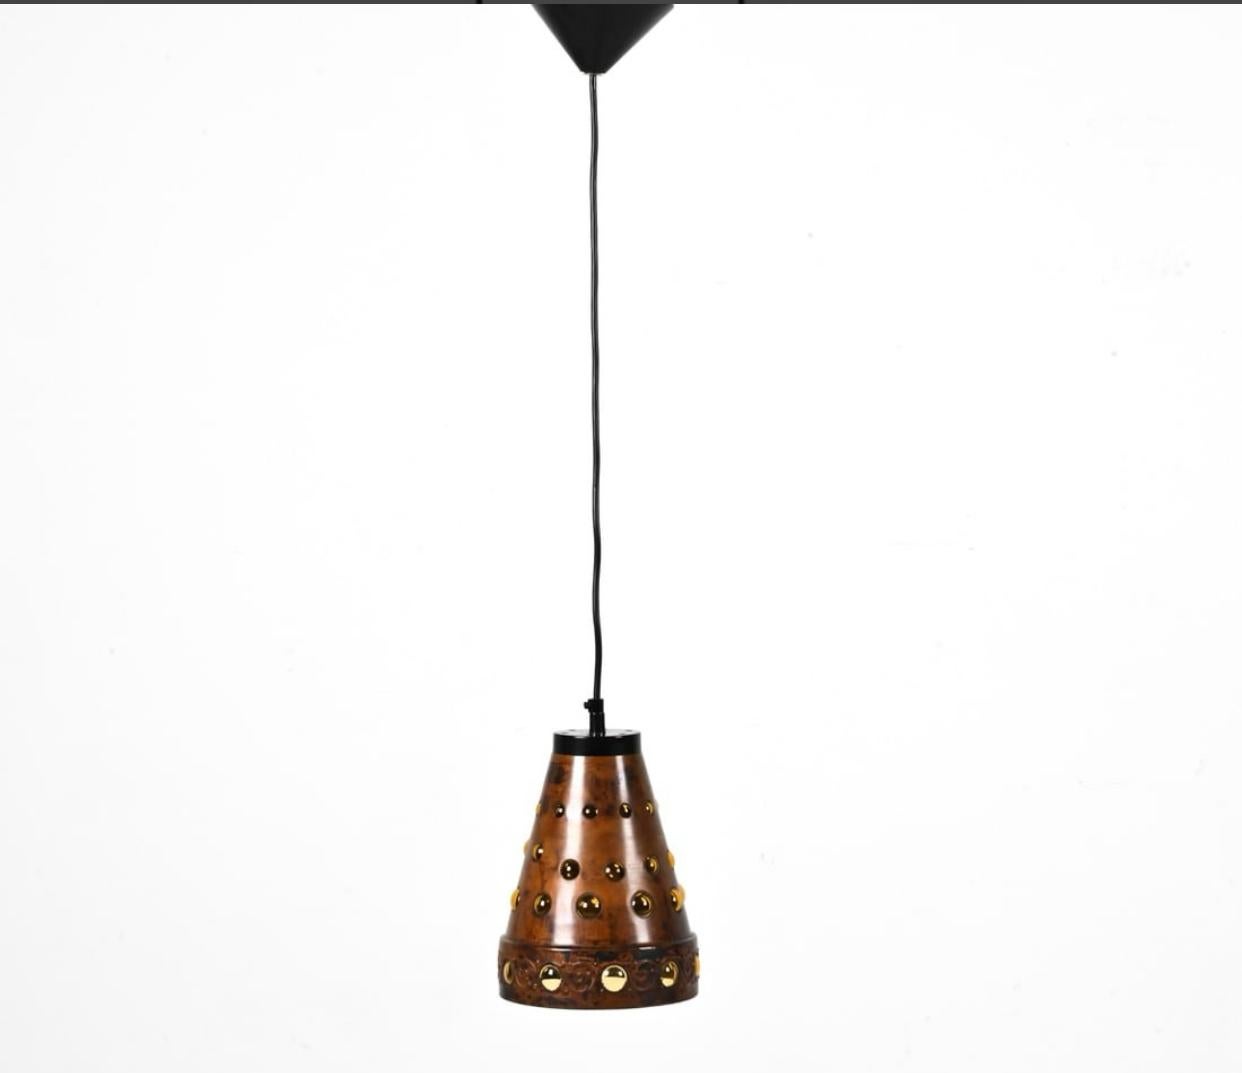 Pair of copper and blown glass pendant light by Nanny Still McKinney for RAAK of Amsterdam. The pendant lights themselves measure 6.5” dia. X 8.75” h without cord and canopy. We have the ability to make the lights any height with changing out the